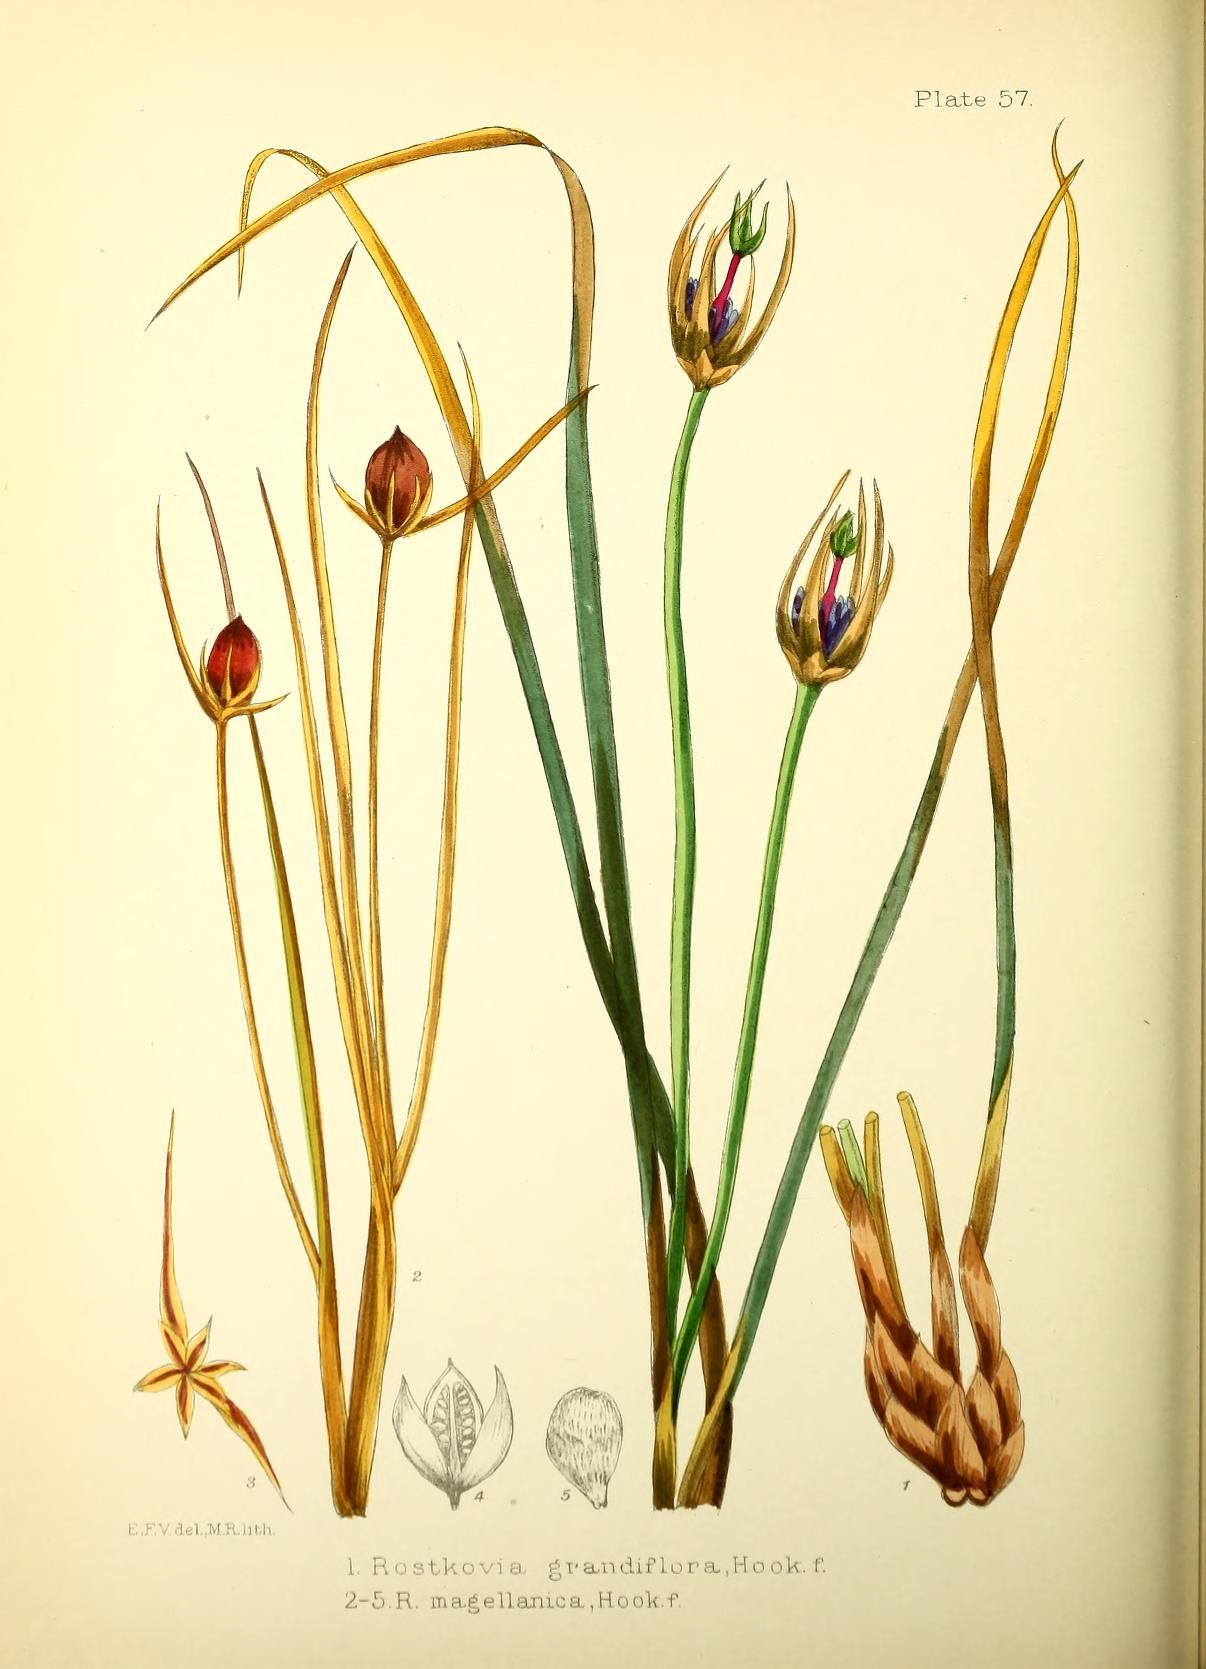 a book page of flowers showing the different types of blooms